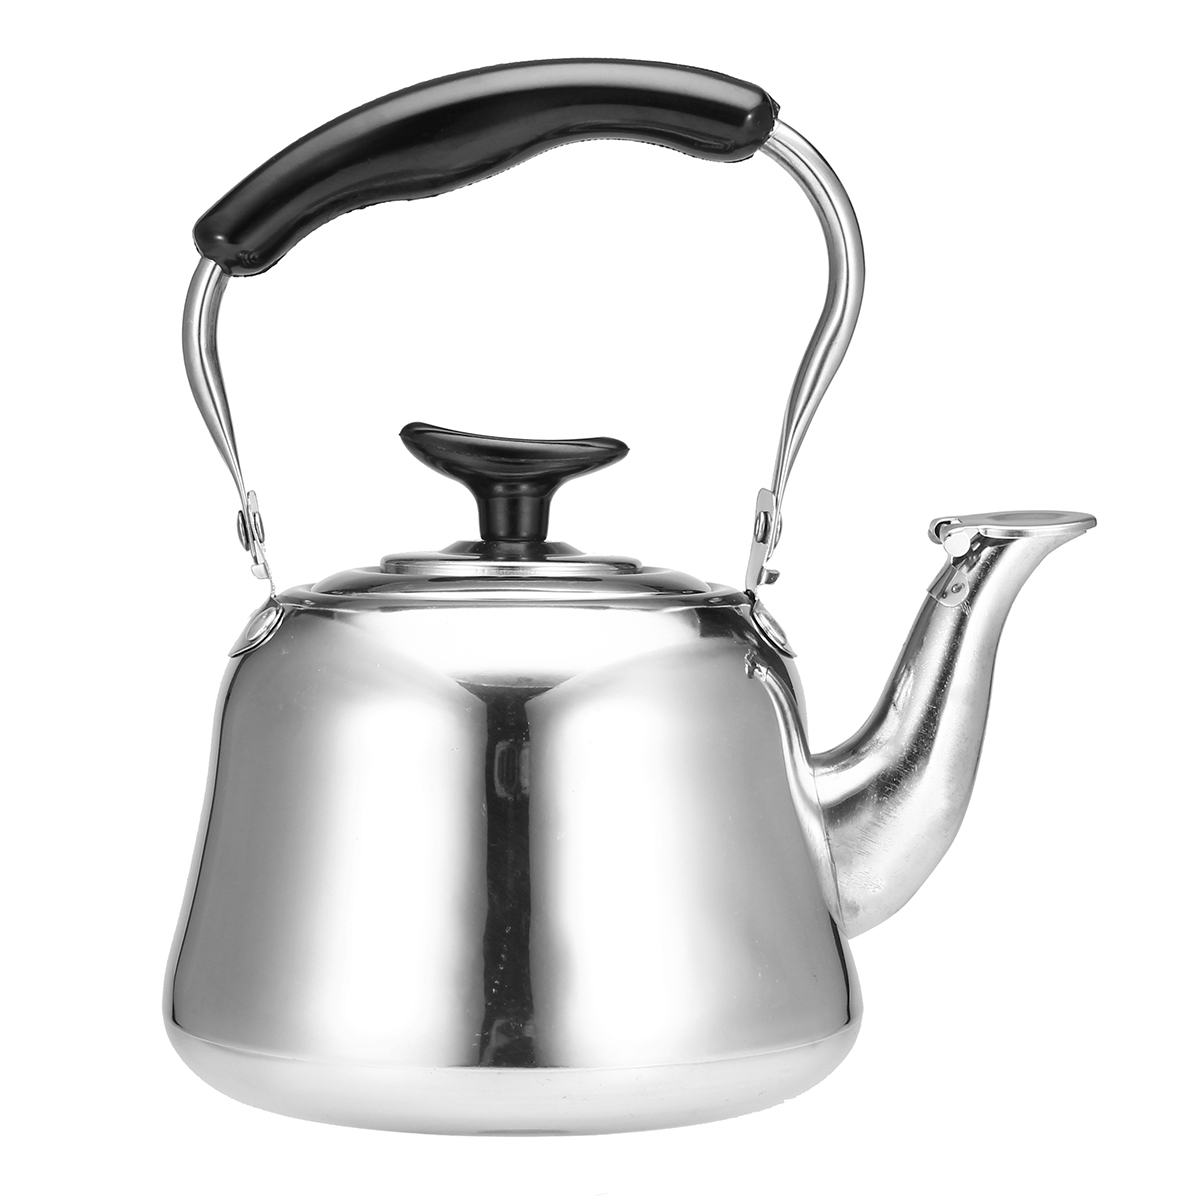 1L Whistling Tea Kettle Rust Resistant Stainless Steel Gas Electric Induction Stovetop Kettle Water Kettles Camping Teapot